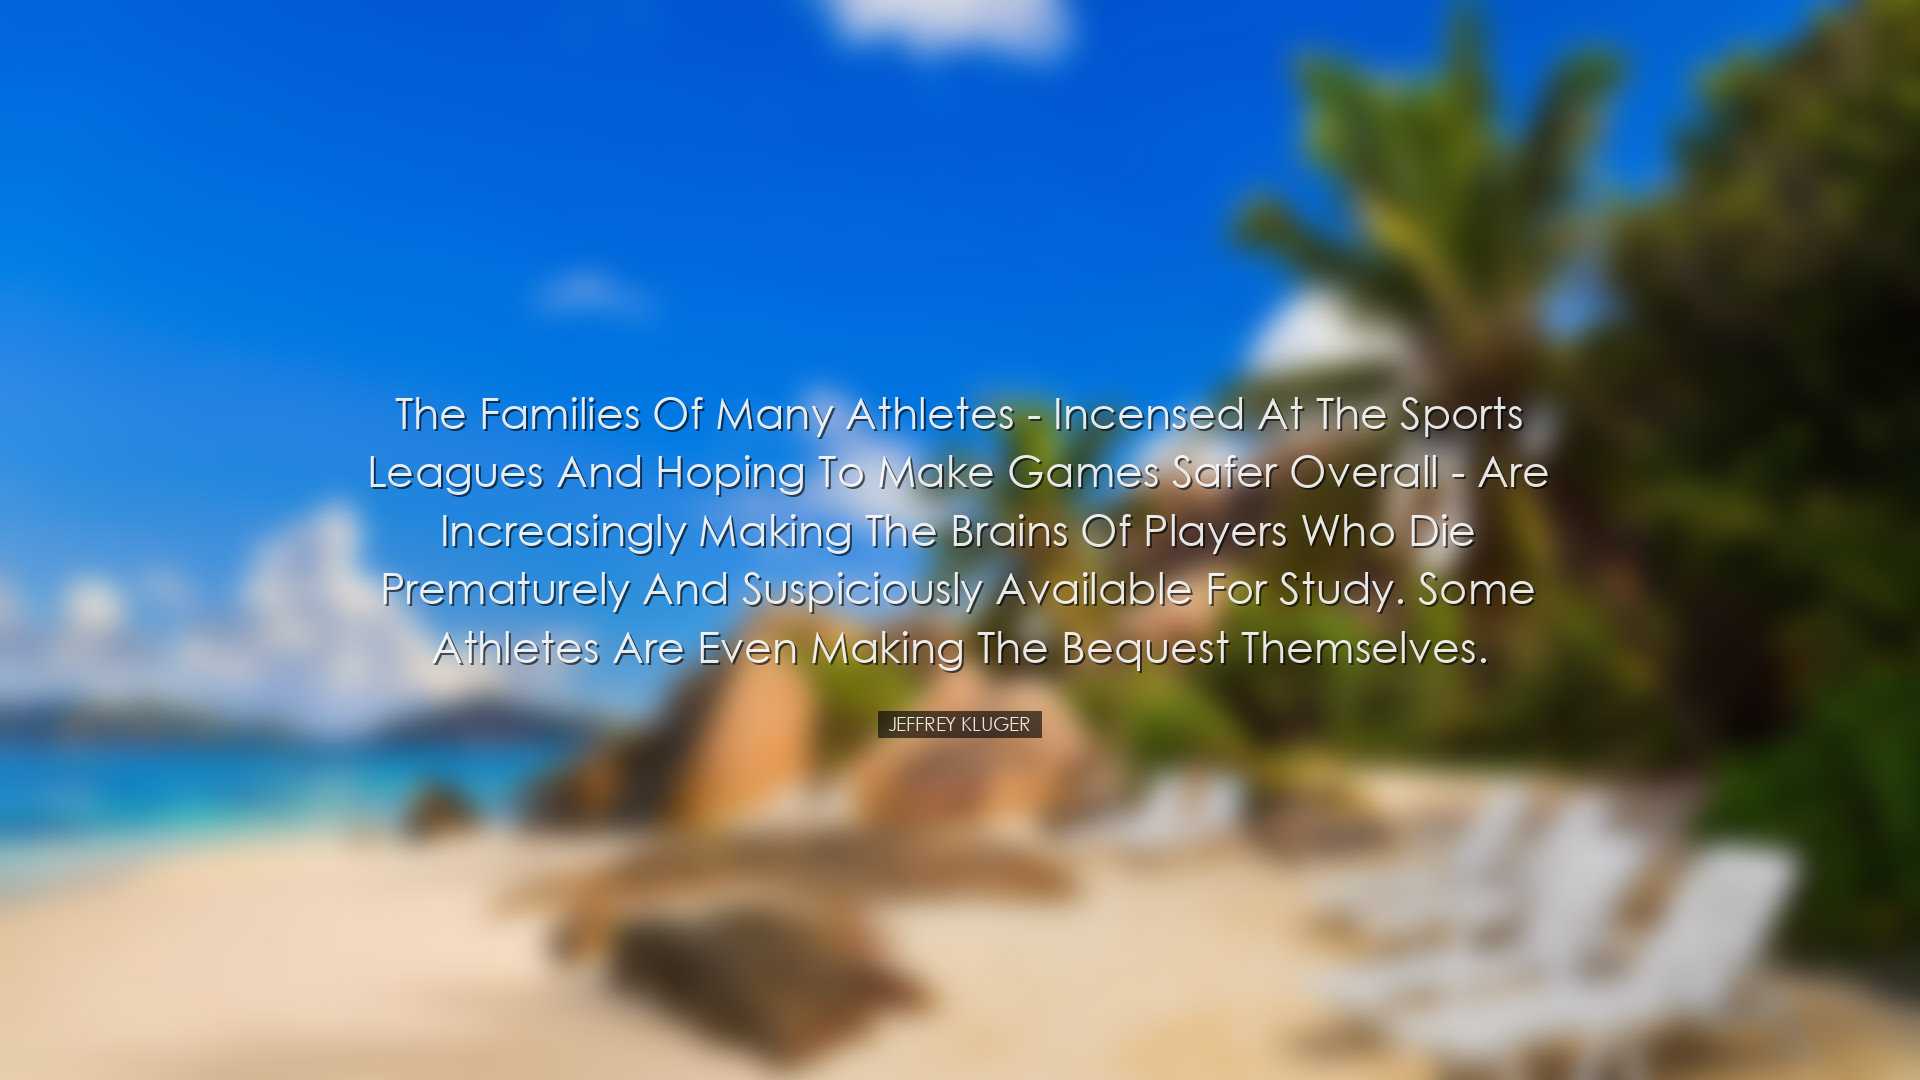 The families of many athletes - incensed at the sports leagues and